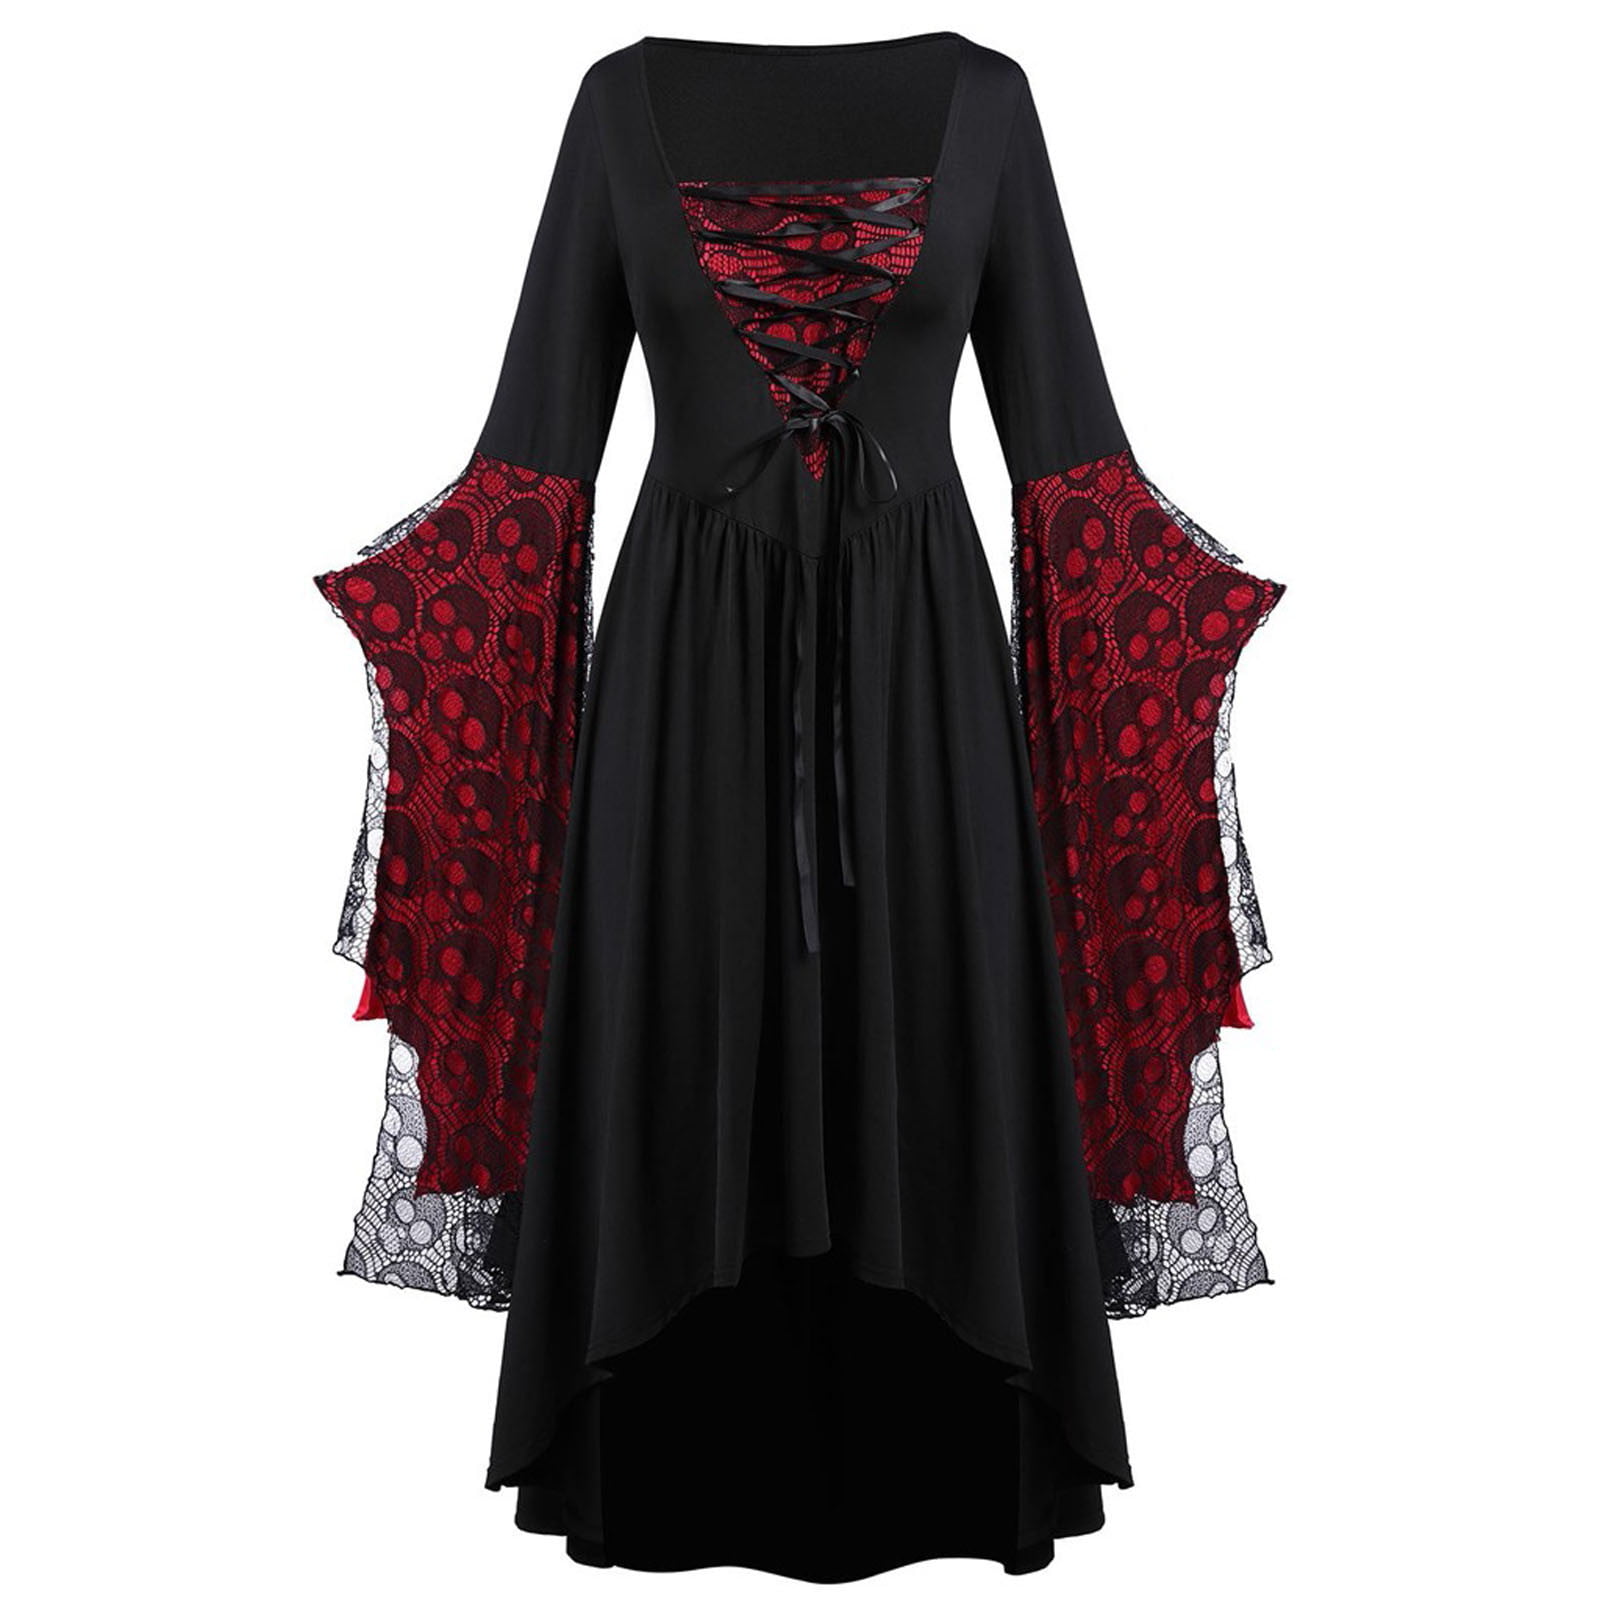 Long Sleeve Dress Halloween Womens Gothic MedievalWitch Party Cosplay Costume